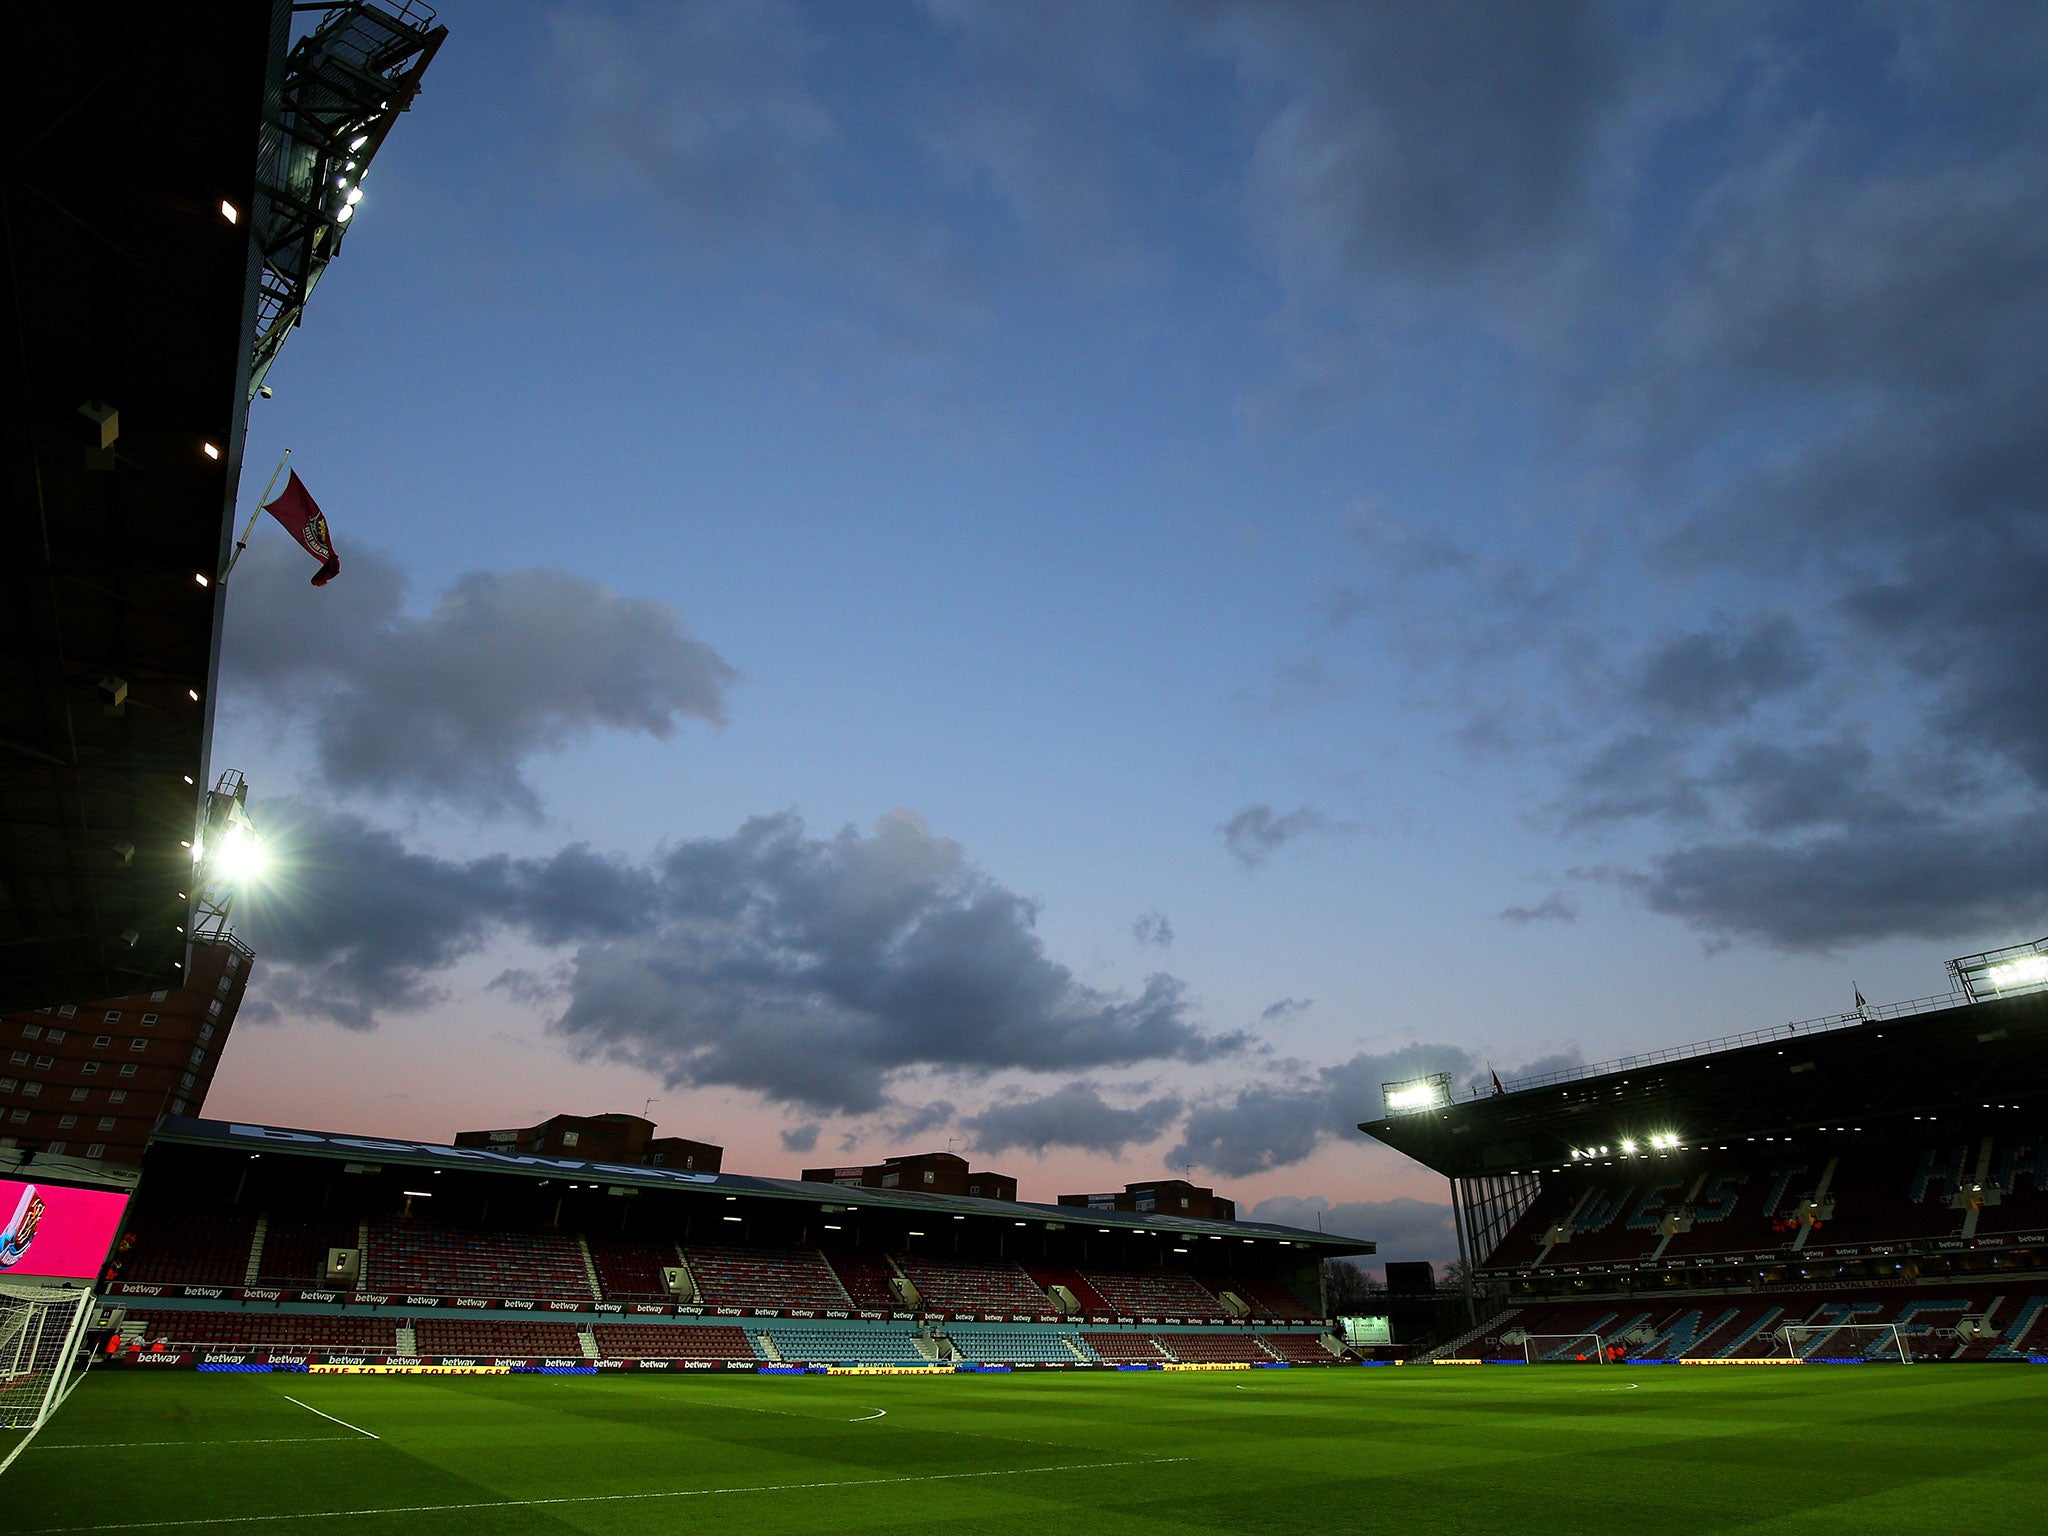 A view of Upton Park